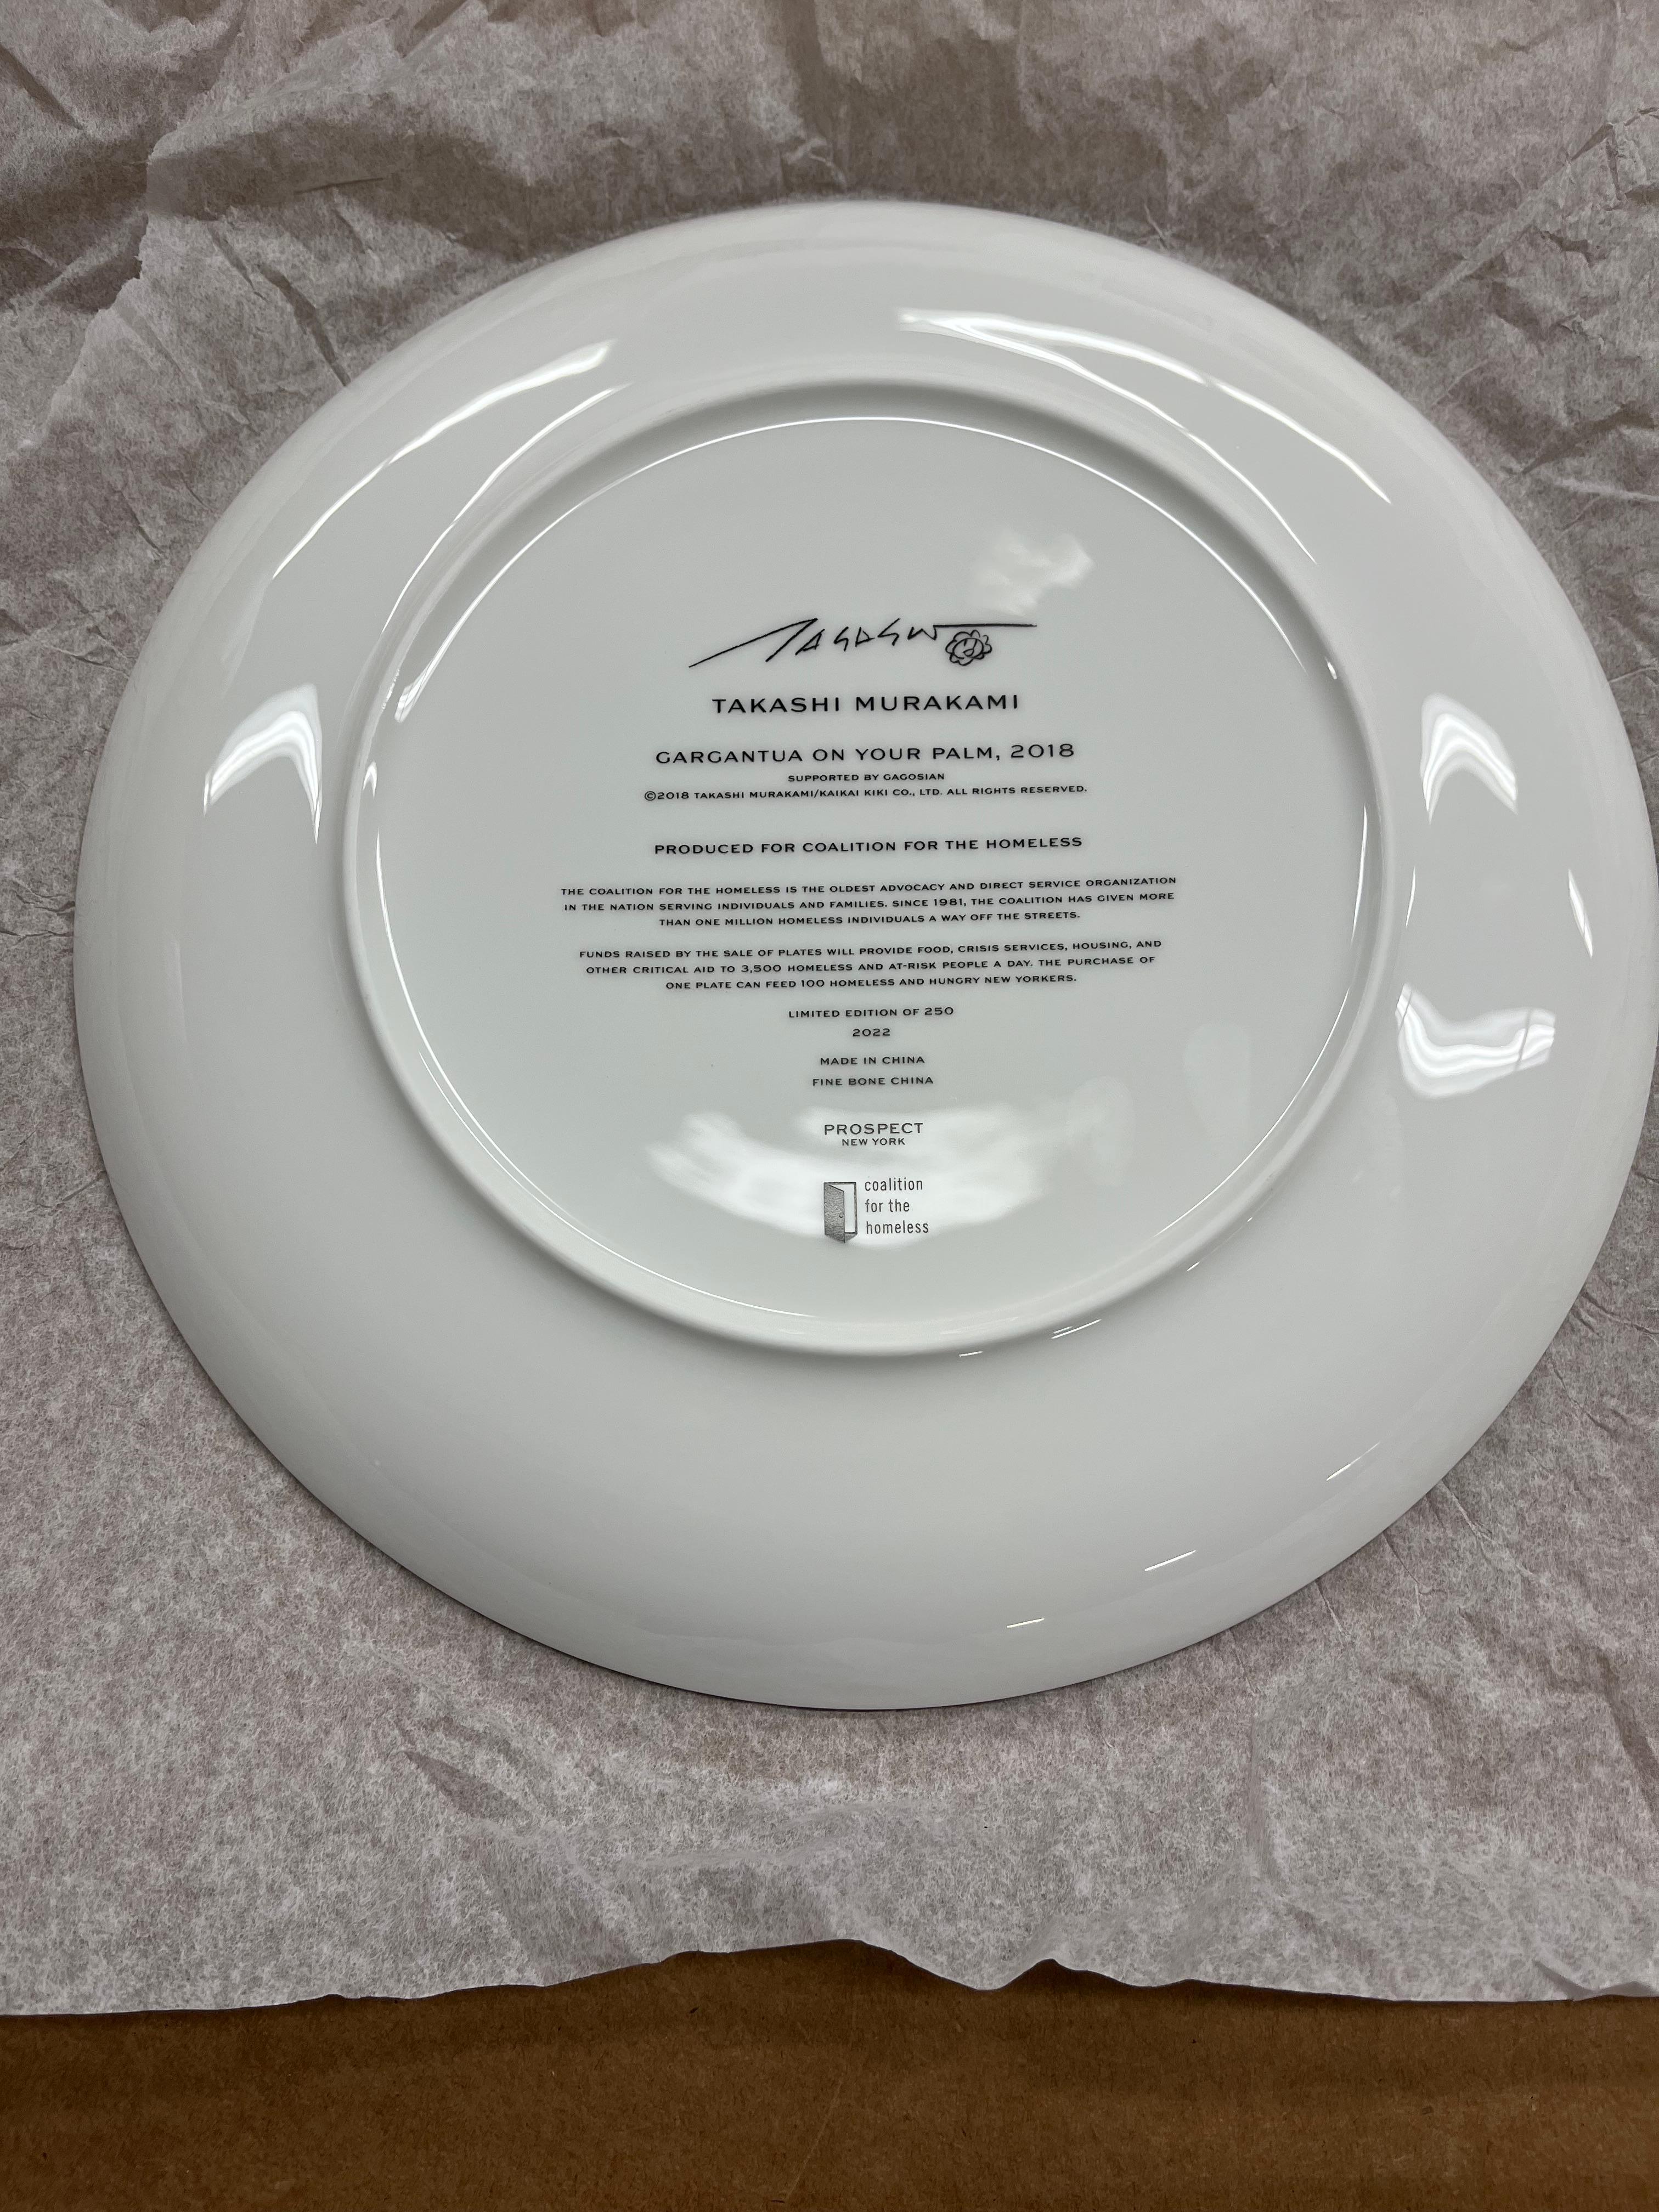 Artist:  Murakami, Takashi
Title:  Gargantua on Your Palm
Date:  2018
Medium:  Fine Bone China
Signature:  Stamped on the reverse
Produced by Coalition for the Homeless
Edition:  250
Collections:  Comes in original box with packaging